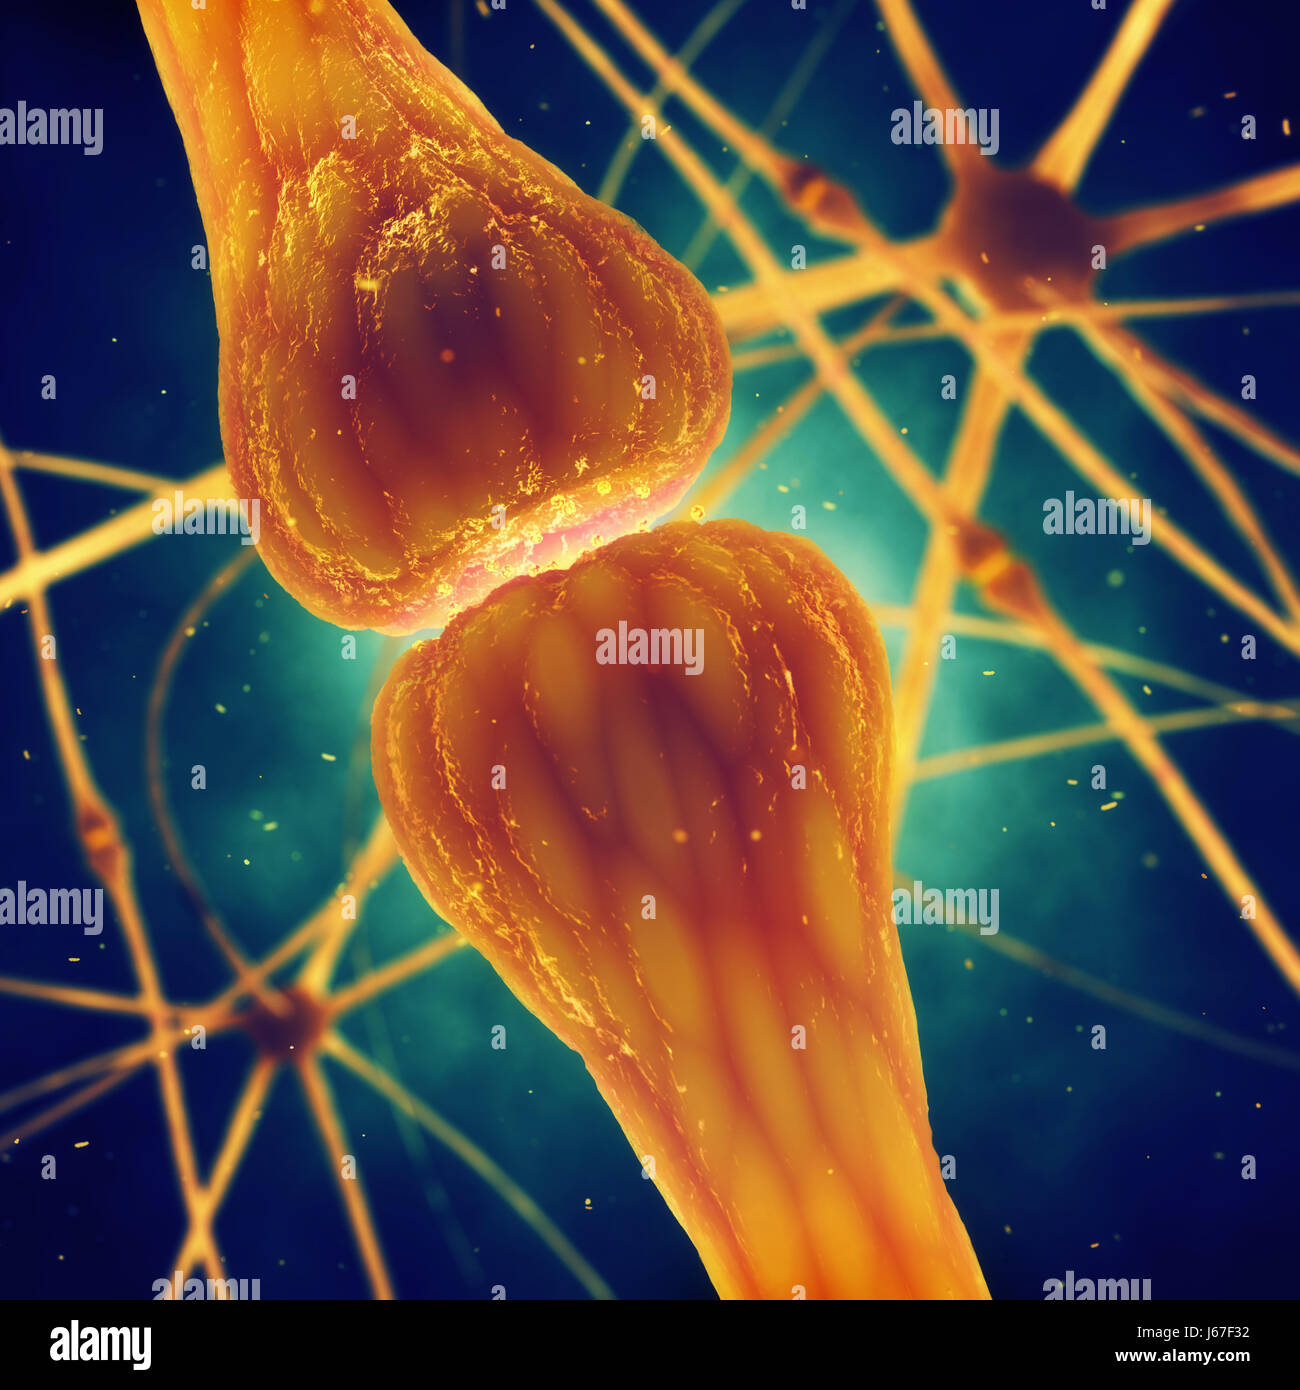 Synaptic transmission is the process by which neurotransmitters are released by a neuron and activate the receptors of another neuron , Brain cells Stock Photo